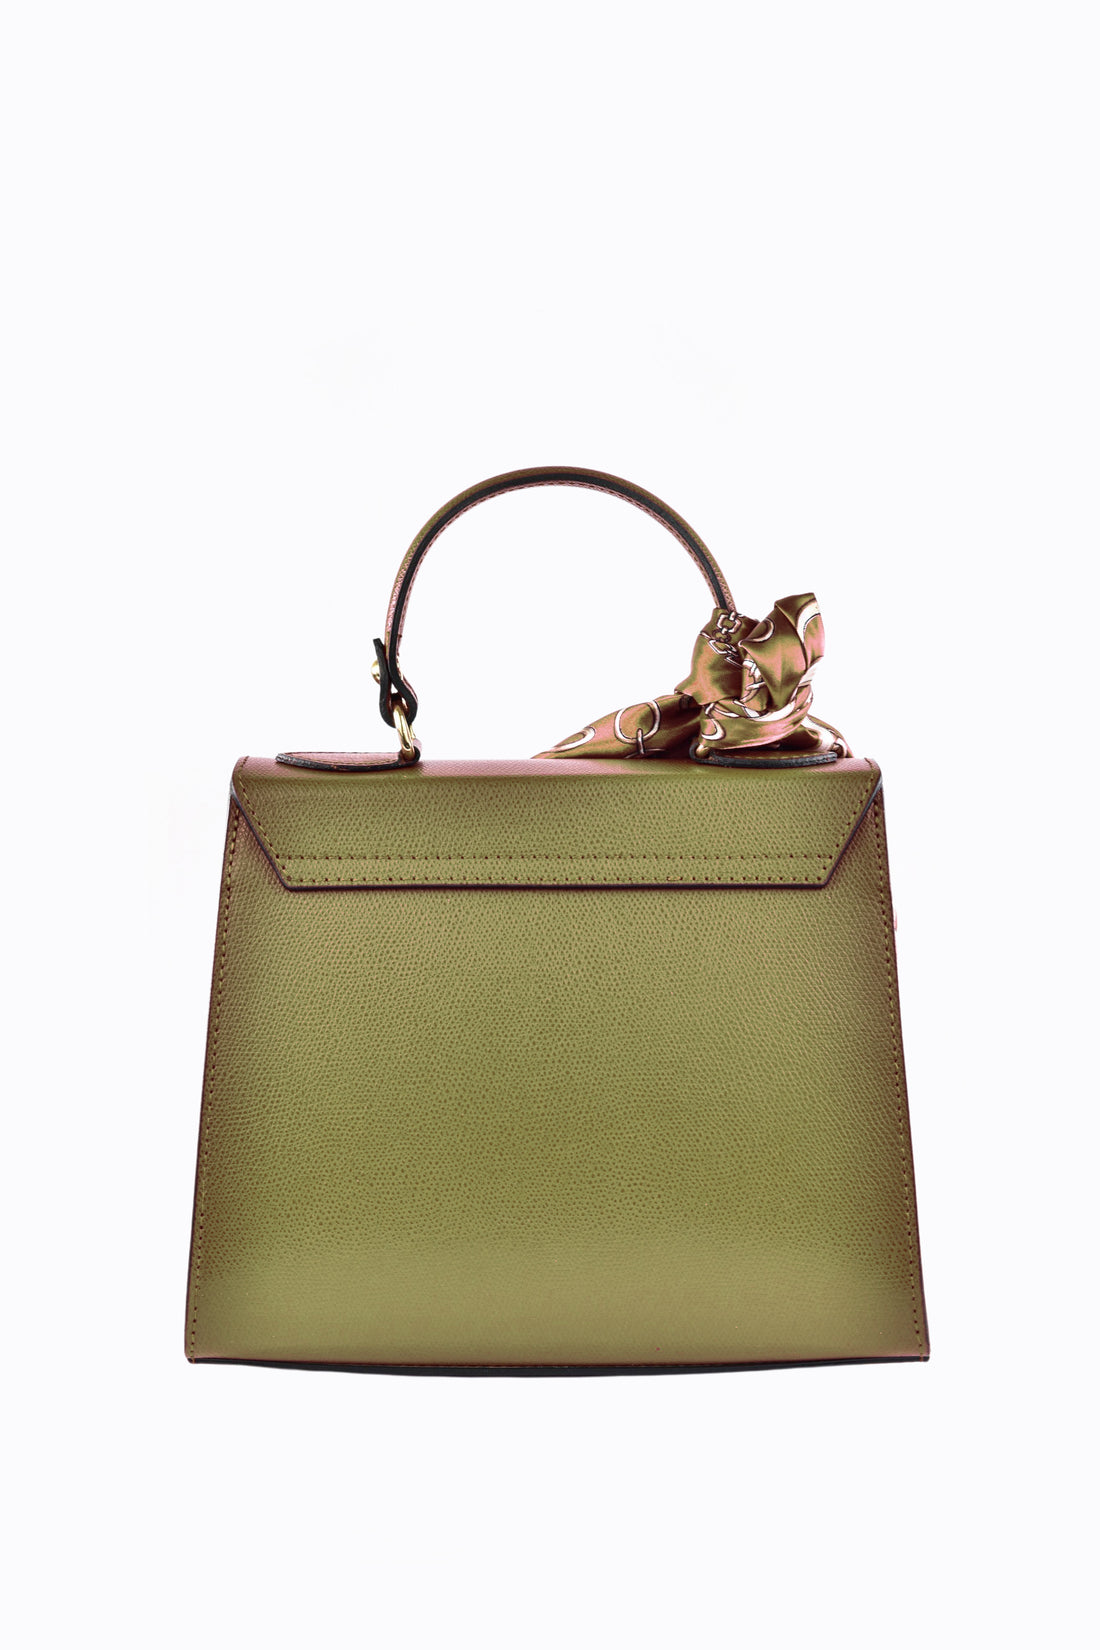 Marigold bag in Olive Green saffiano leather